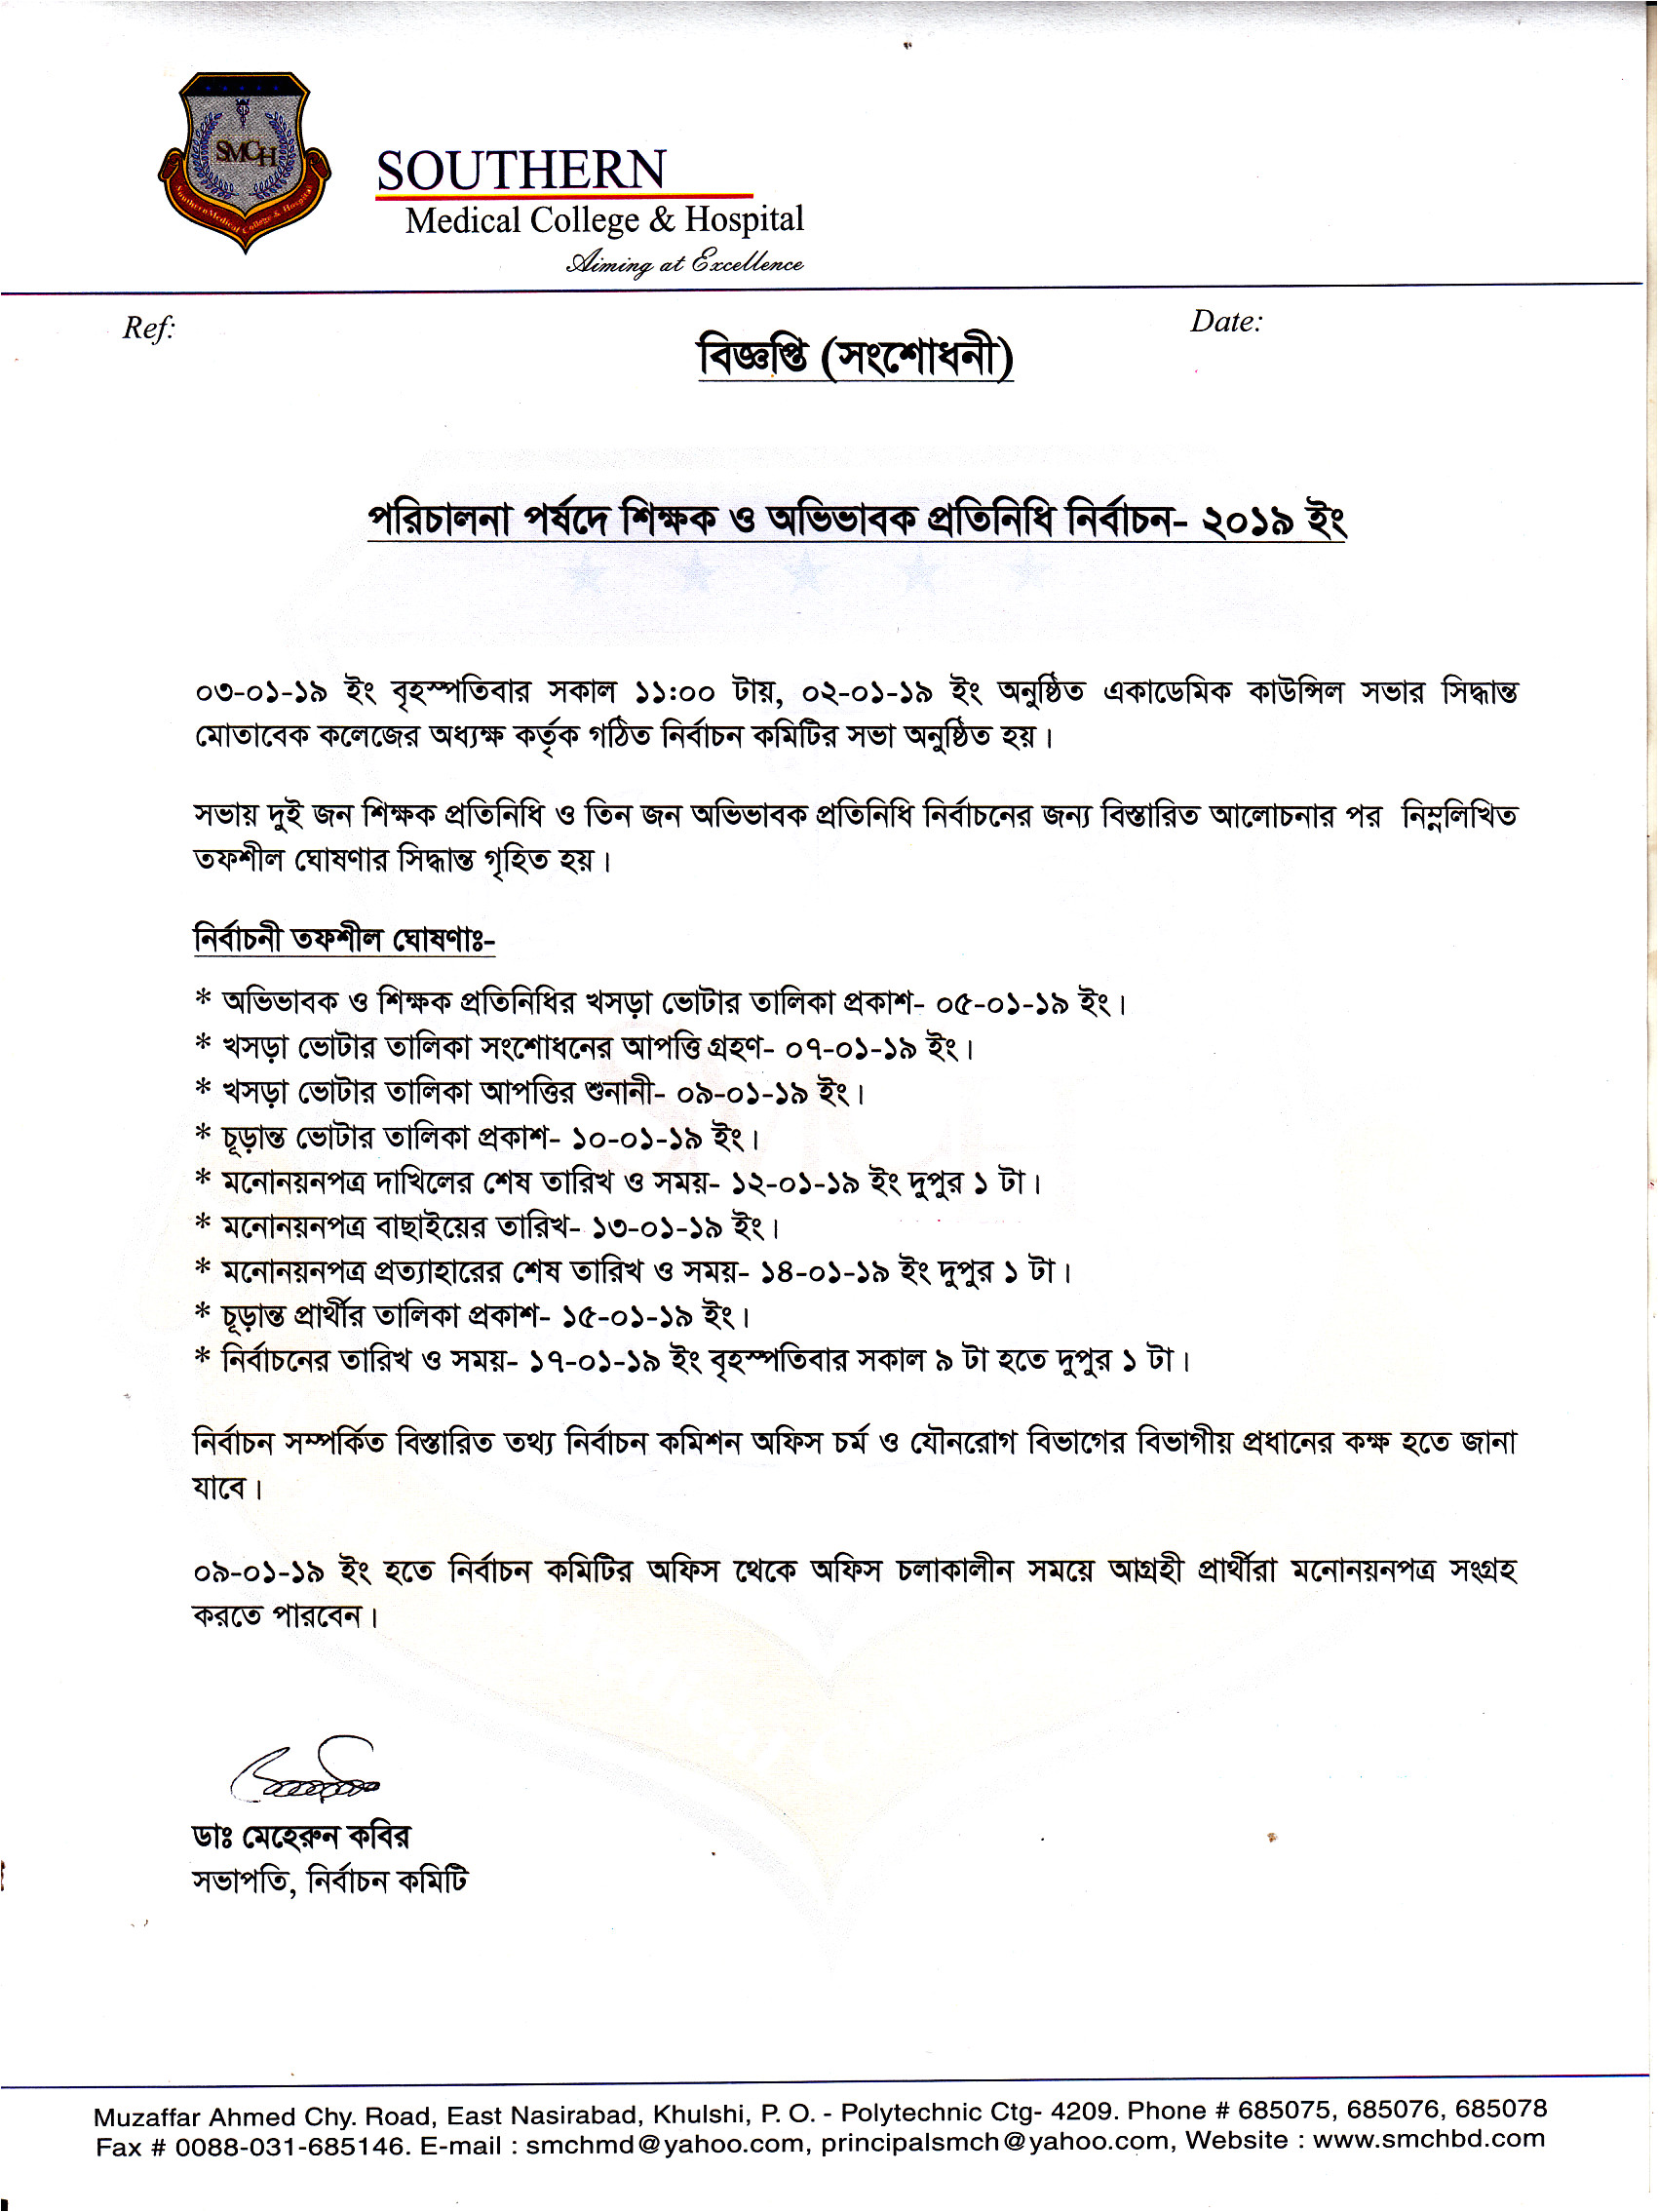 news election of governing body teacher s guardian tafsil corrected 2019 date 10 01 2019